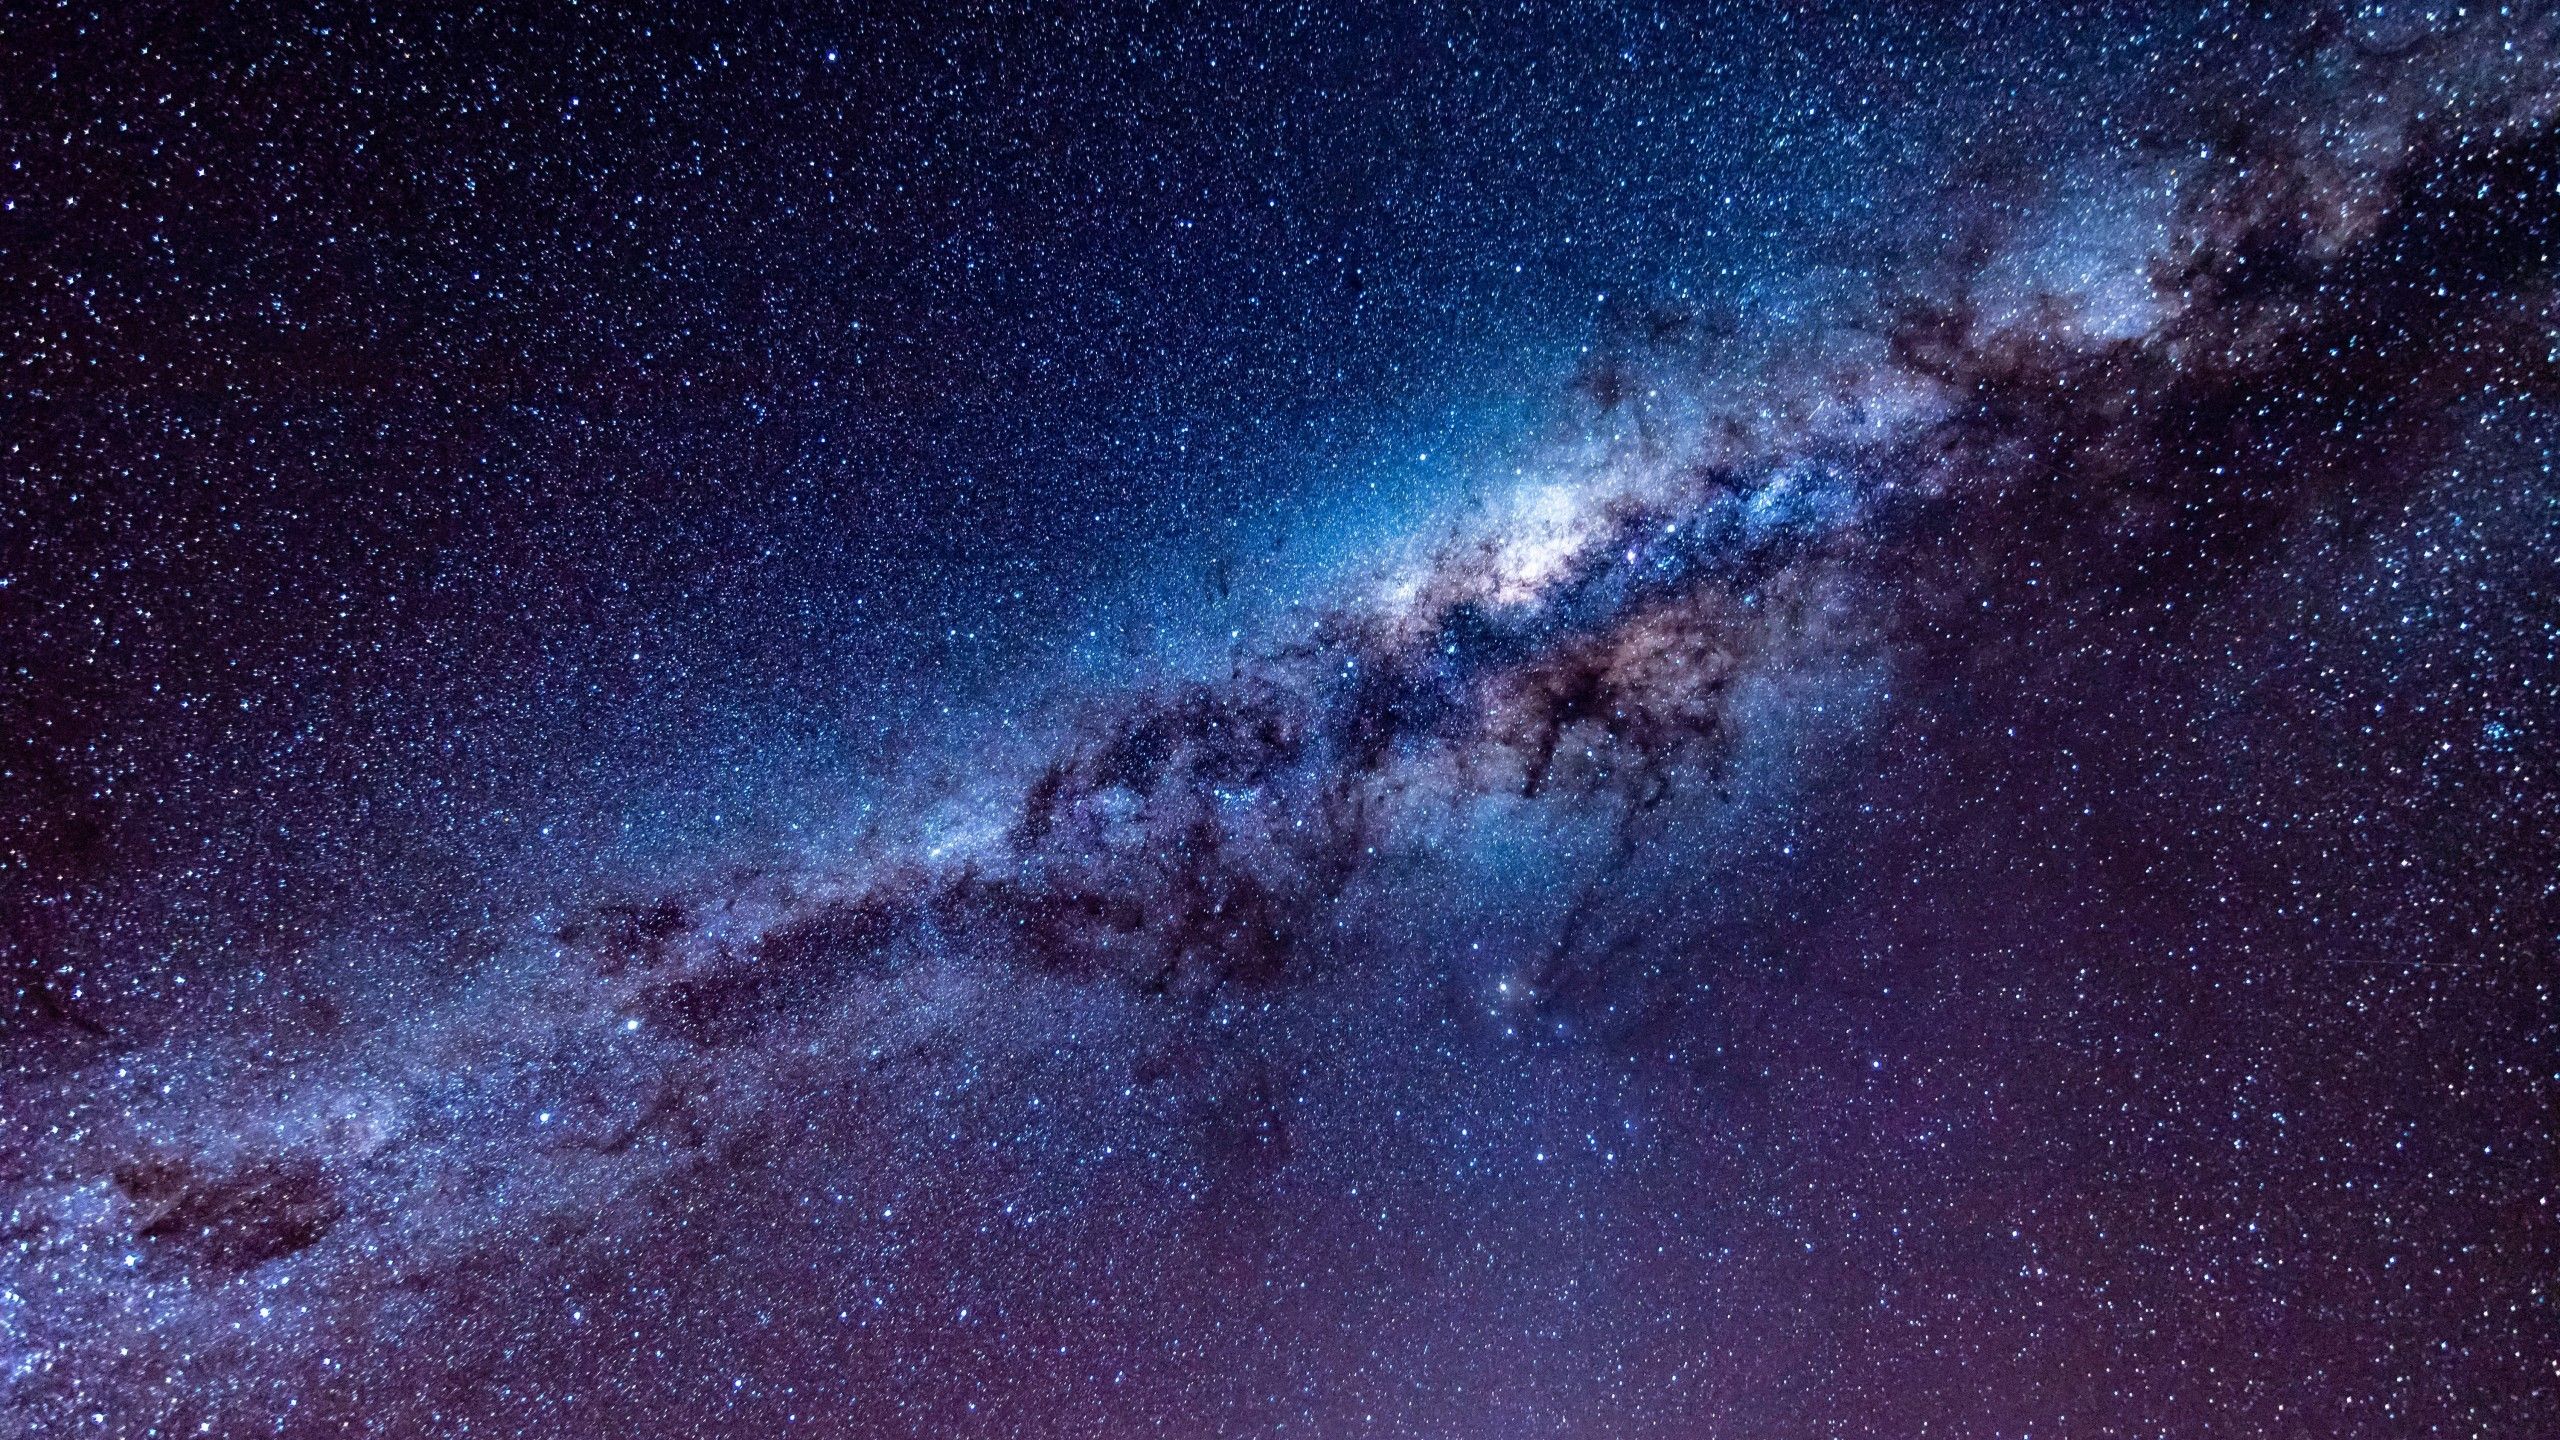 Download 2560x1440 Milky Way, Stars Wallpaper for iMac 27 inch